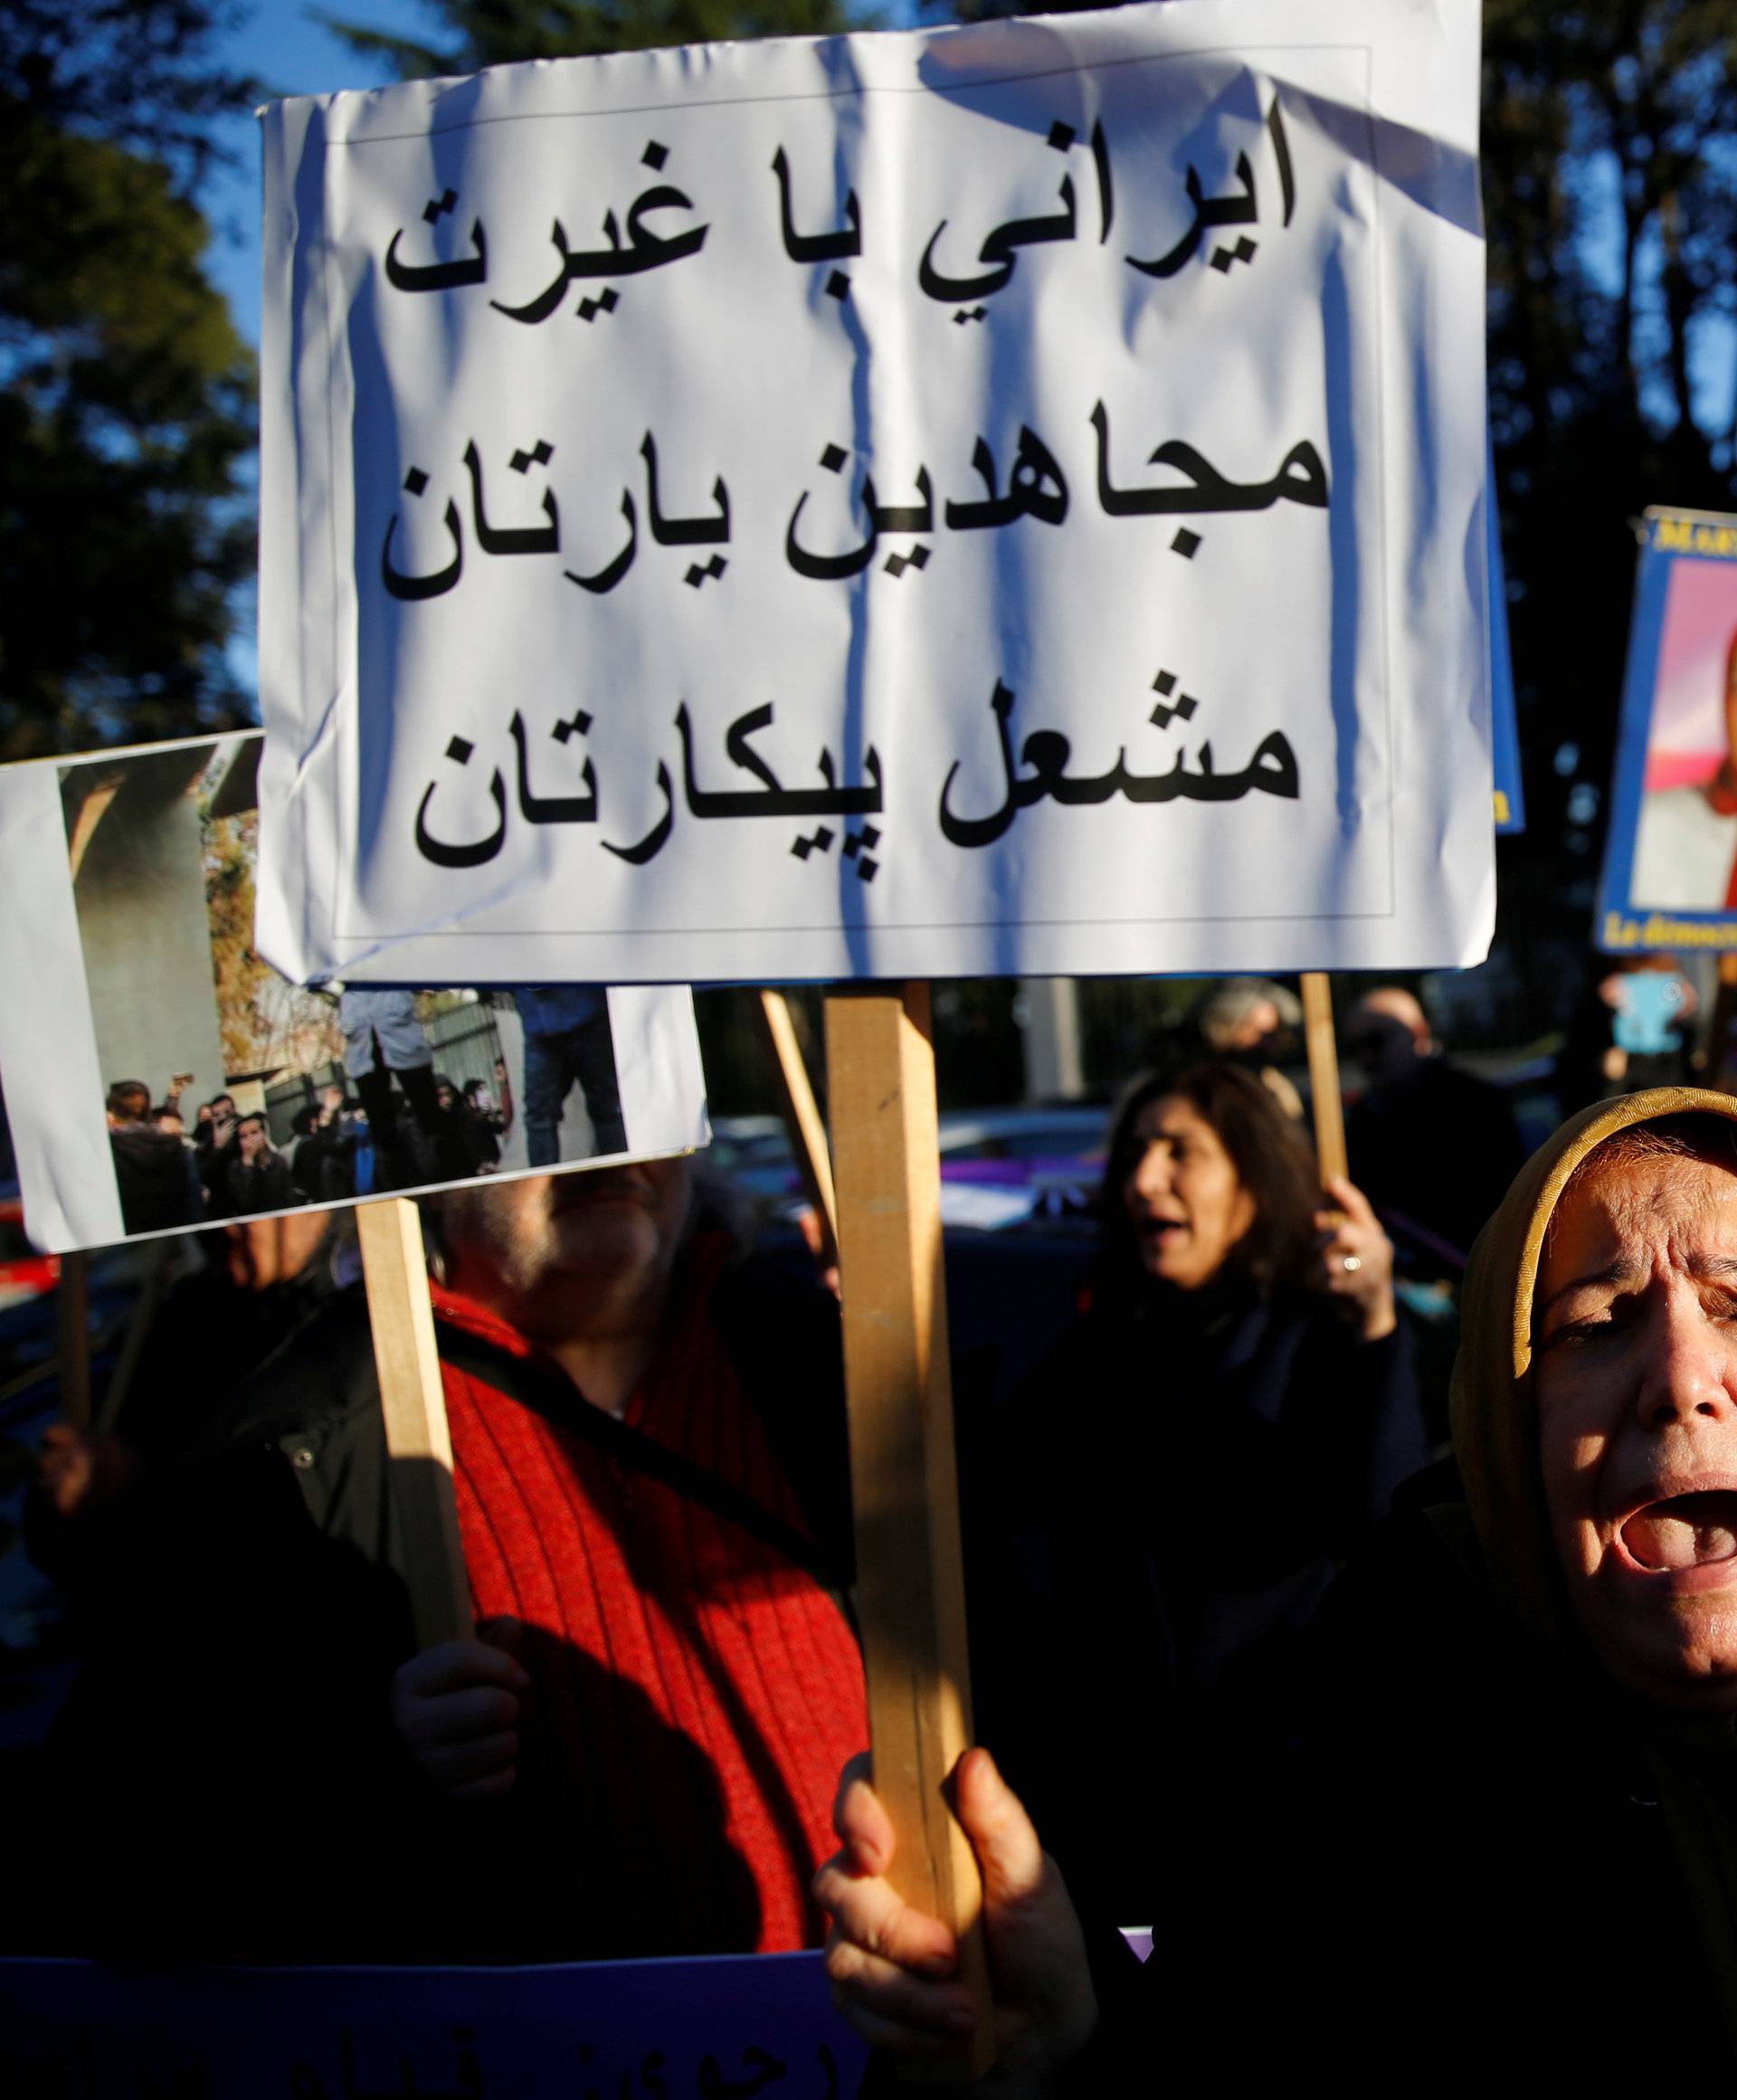 Opponents of Iranian President Hassan Rouhani hold a protest outside the Iranian embassy in Rome